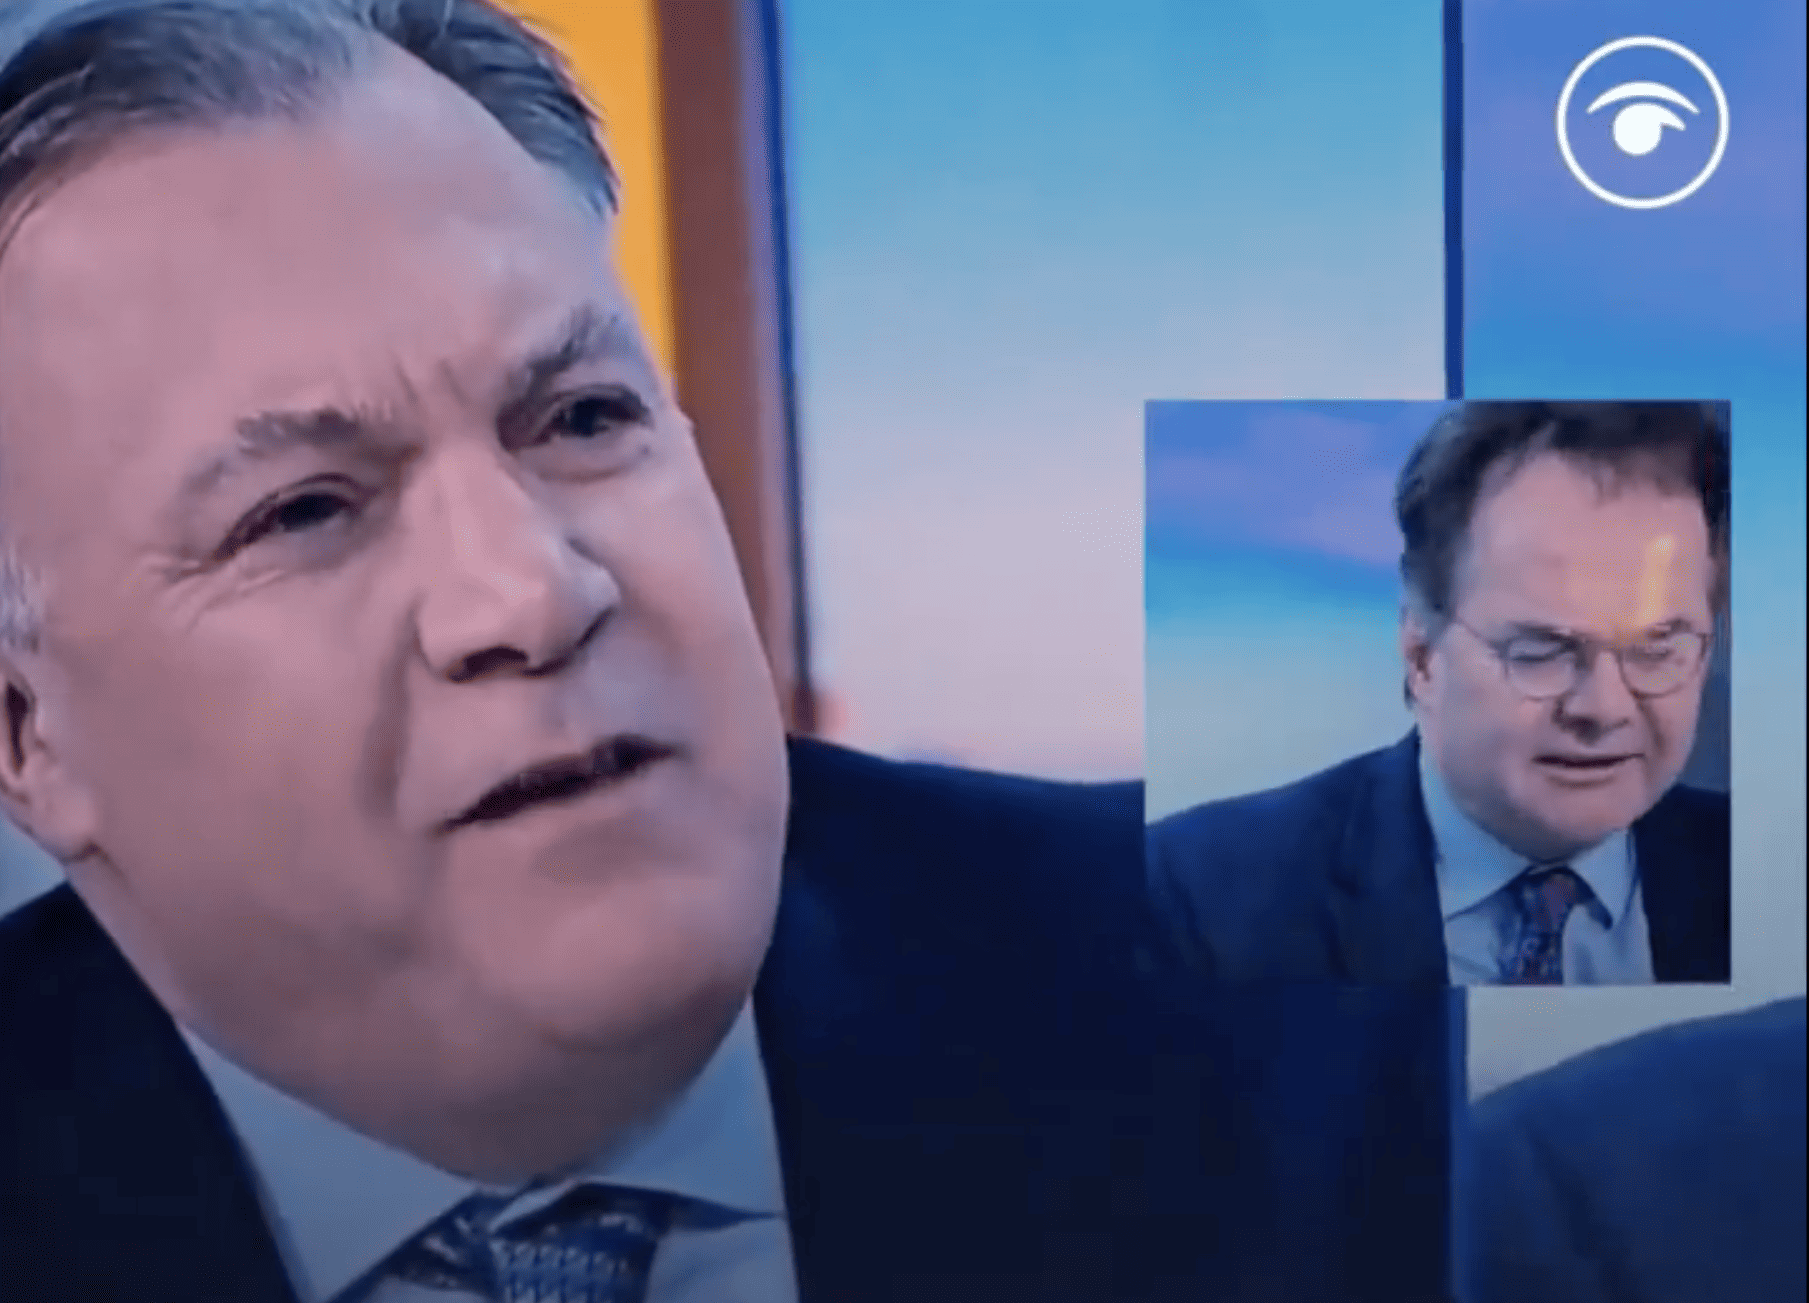 Ed Balls blasts Quentin Letts after he gets called ‘Mr Cooper’ on GMB